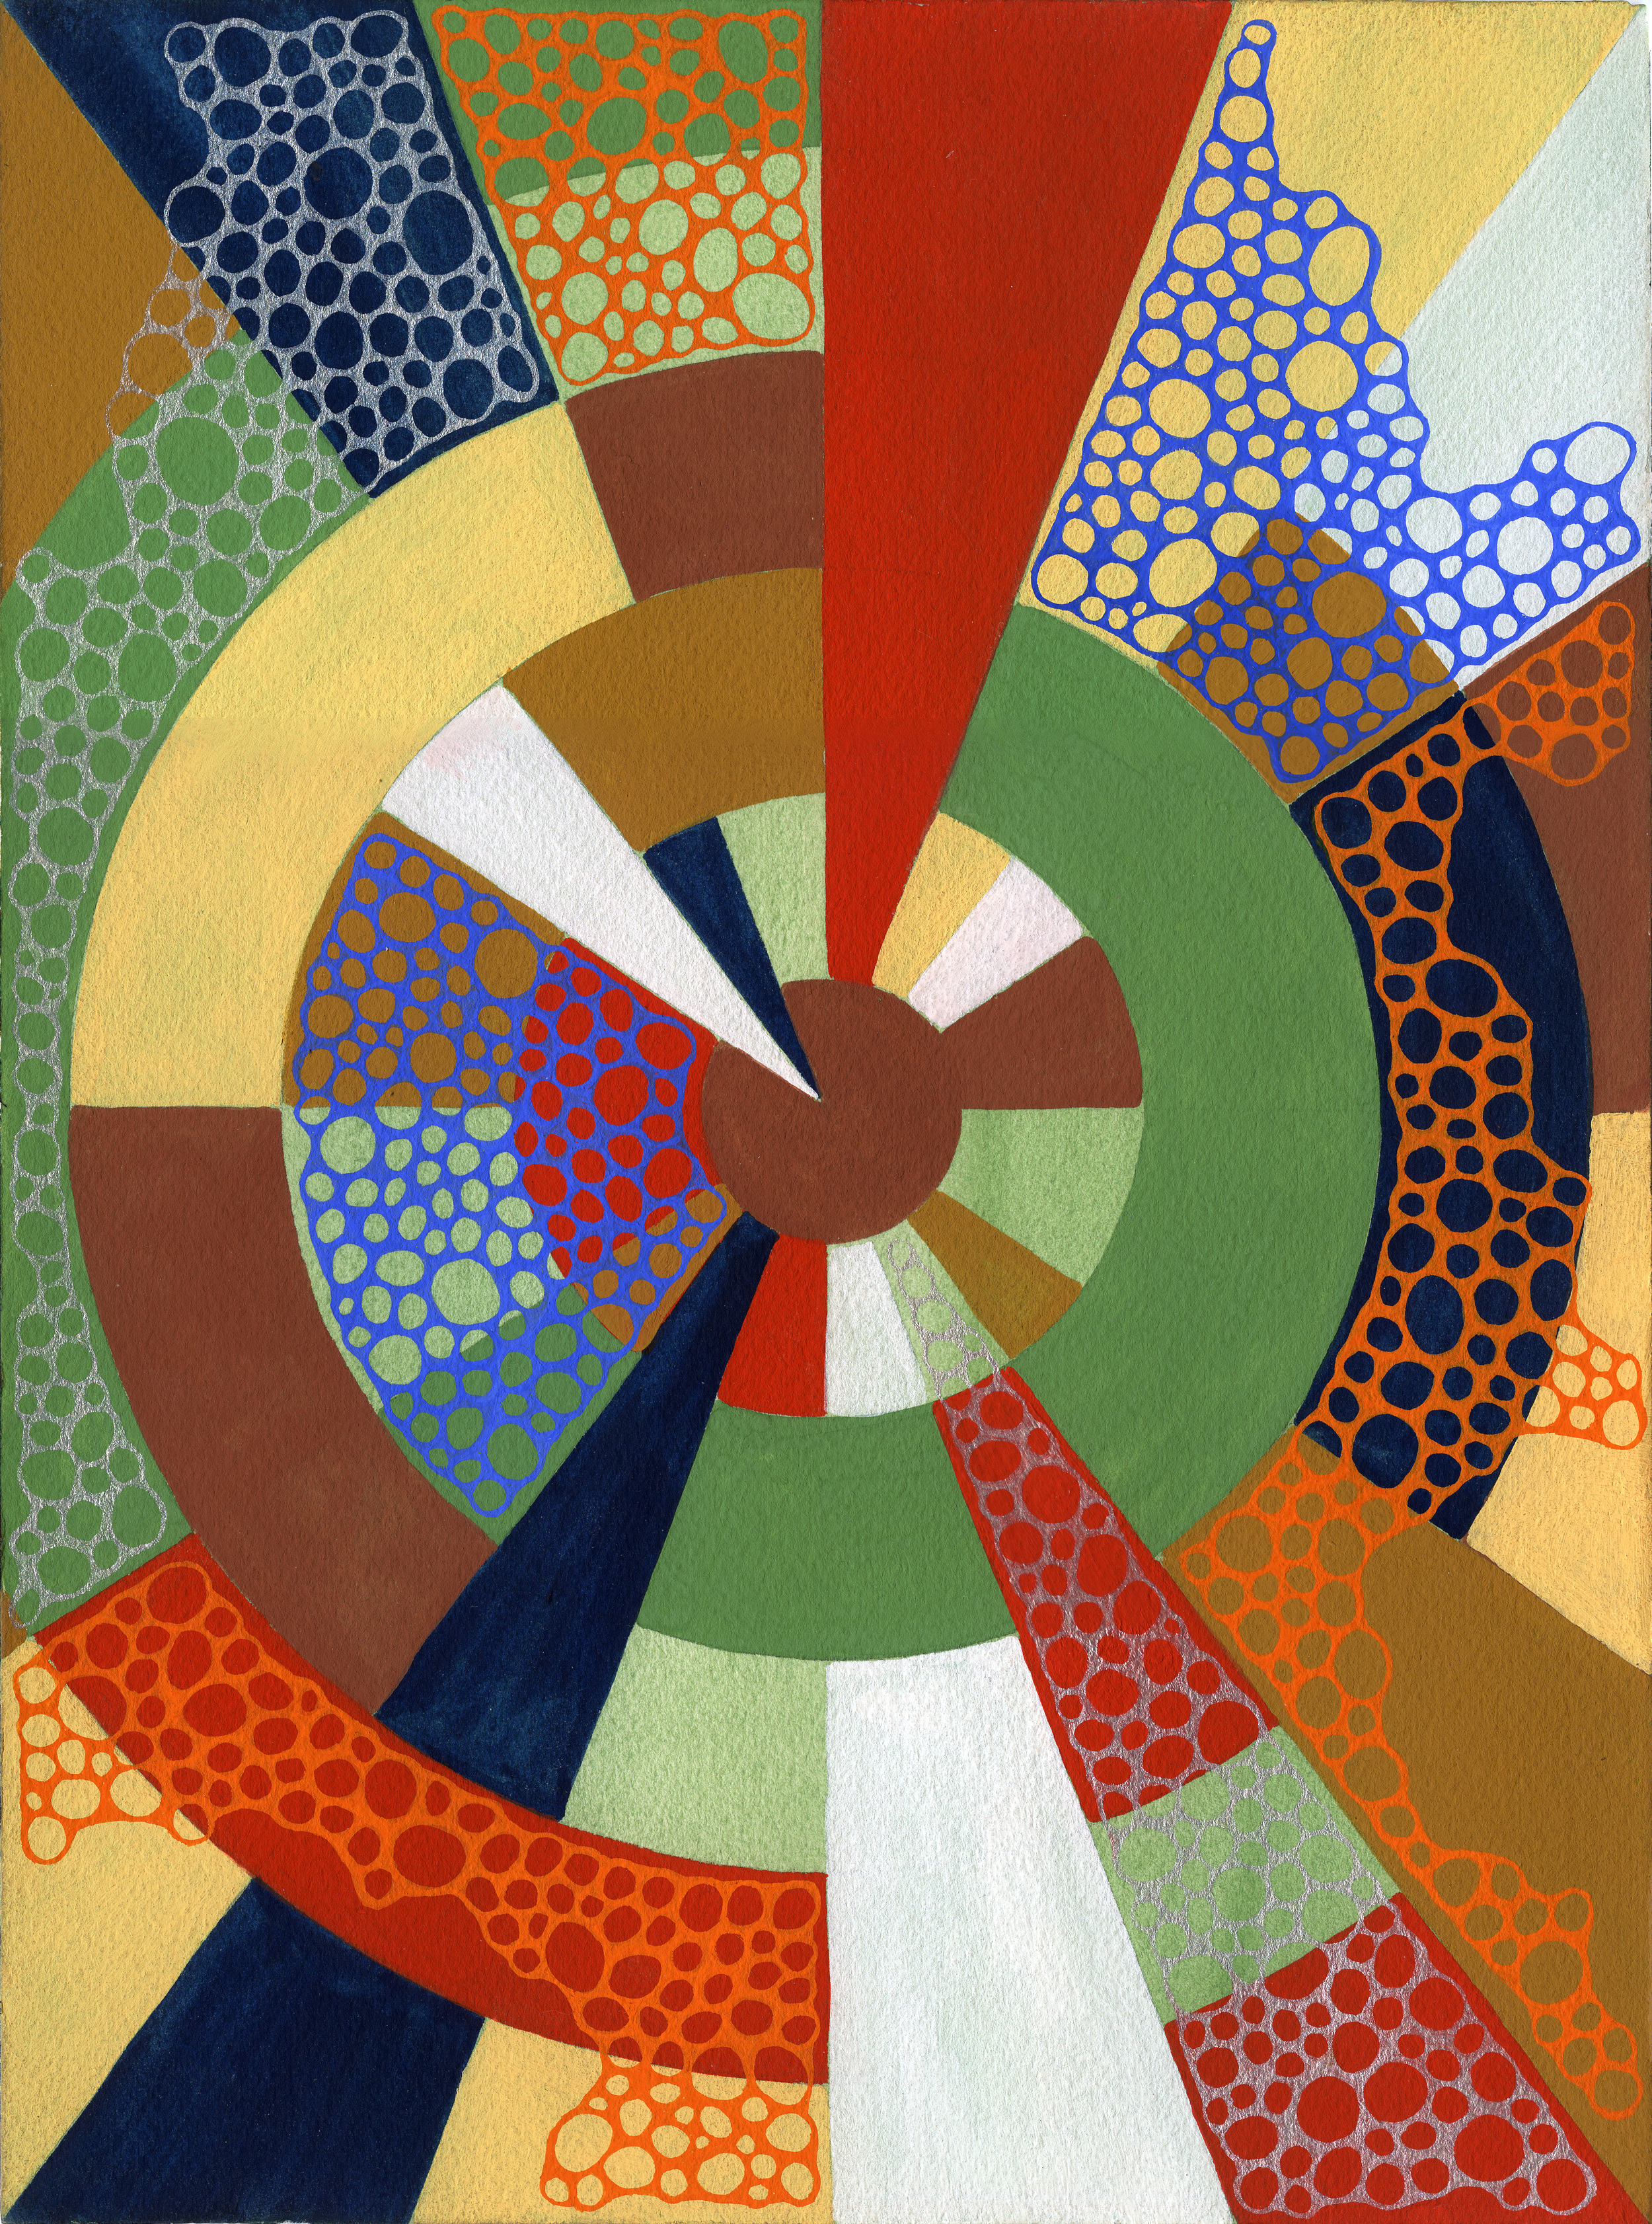 Untitled 012615 Homage to Sonia Delaunay